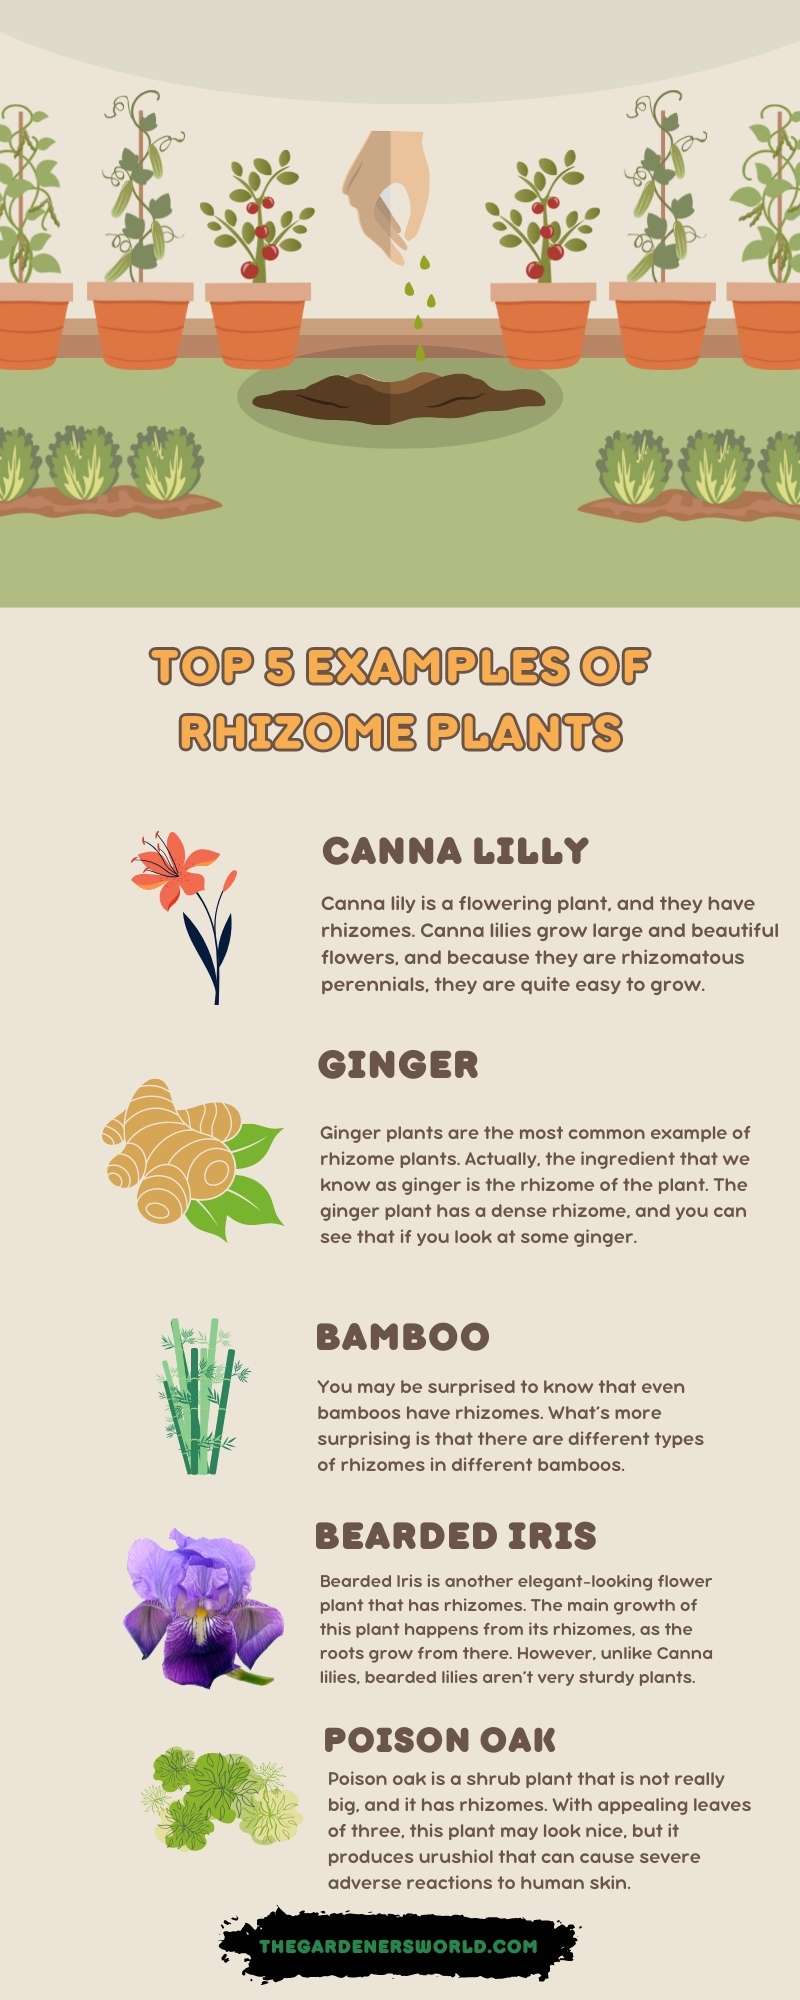 An Infographic of Top 5 Examples of Rhizome Plants
